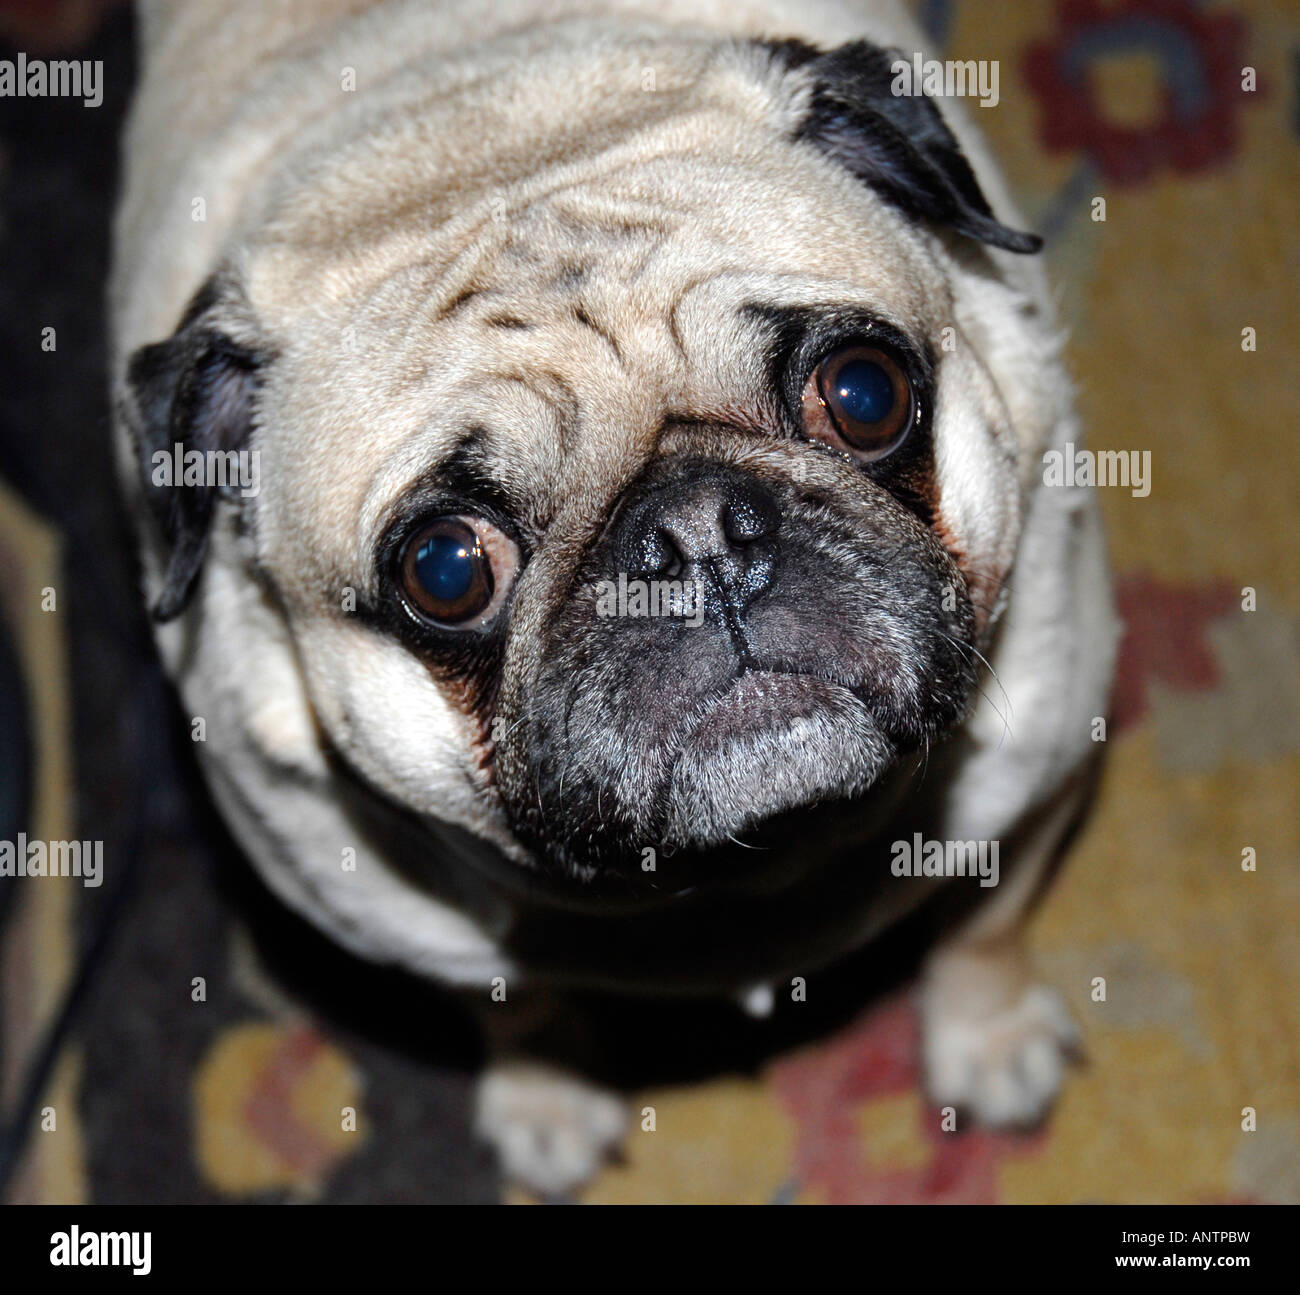 Pug dog looking up and worried Stock Photo